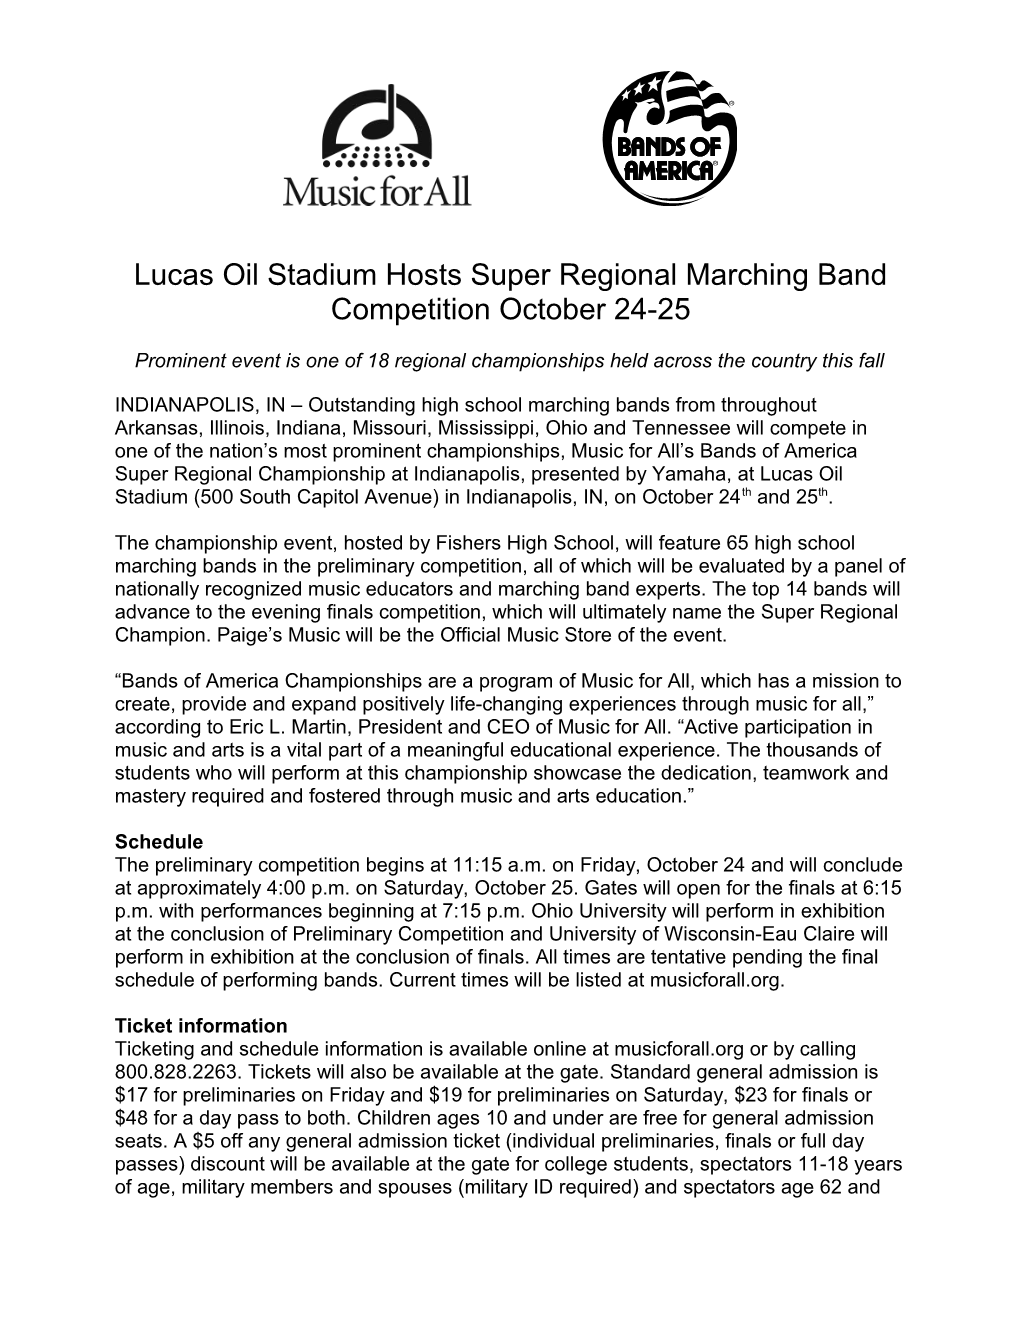 Lucas Oil Stadium Hosts Super Regional Marching Band Competition October 24-25